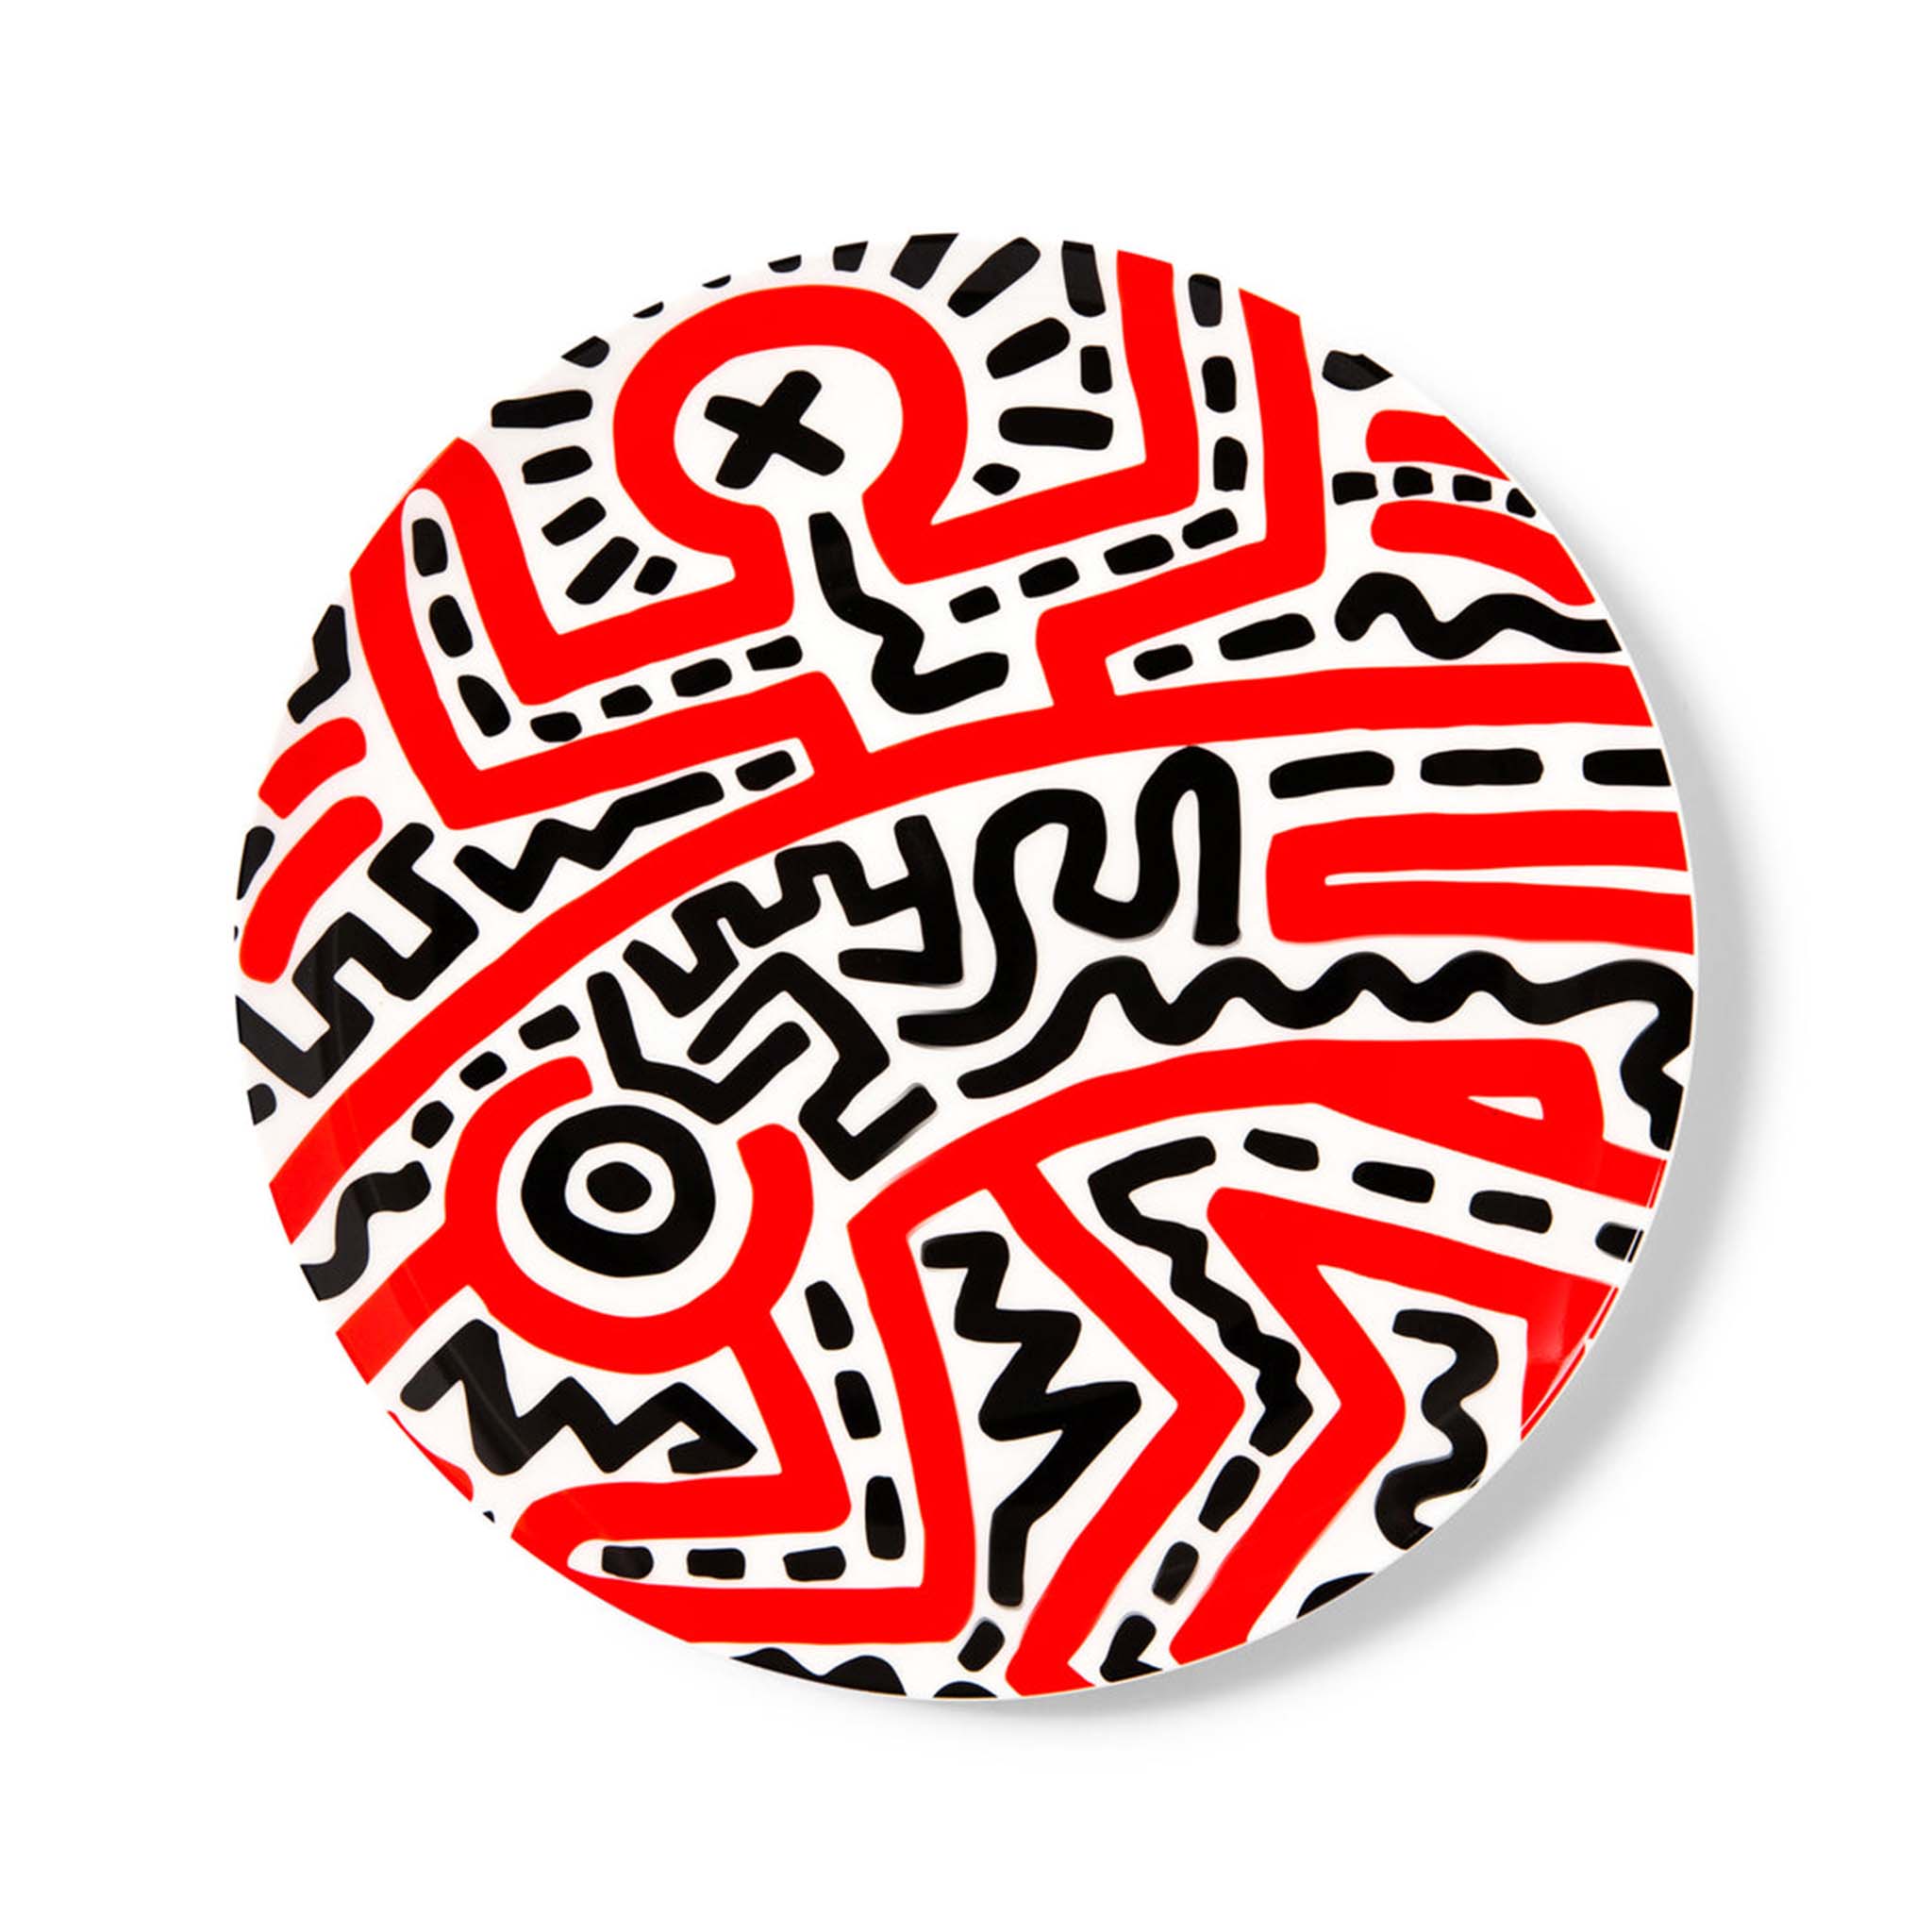 Plate by Keith Haring